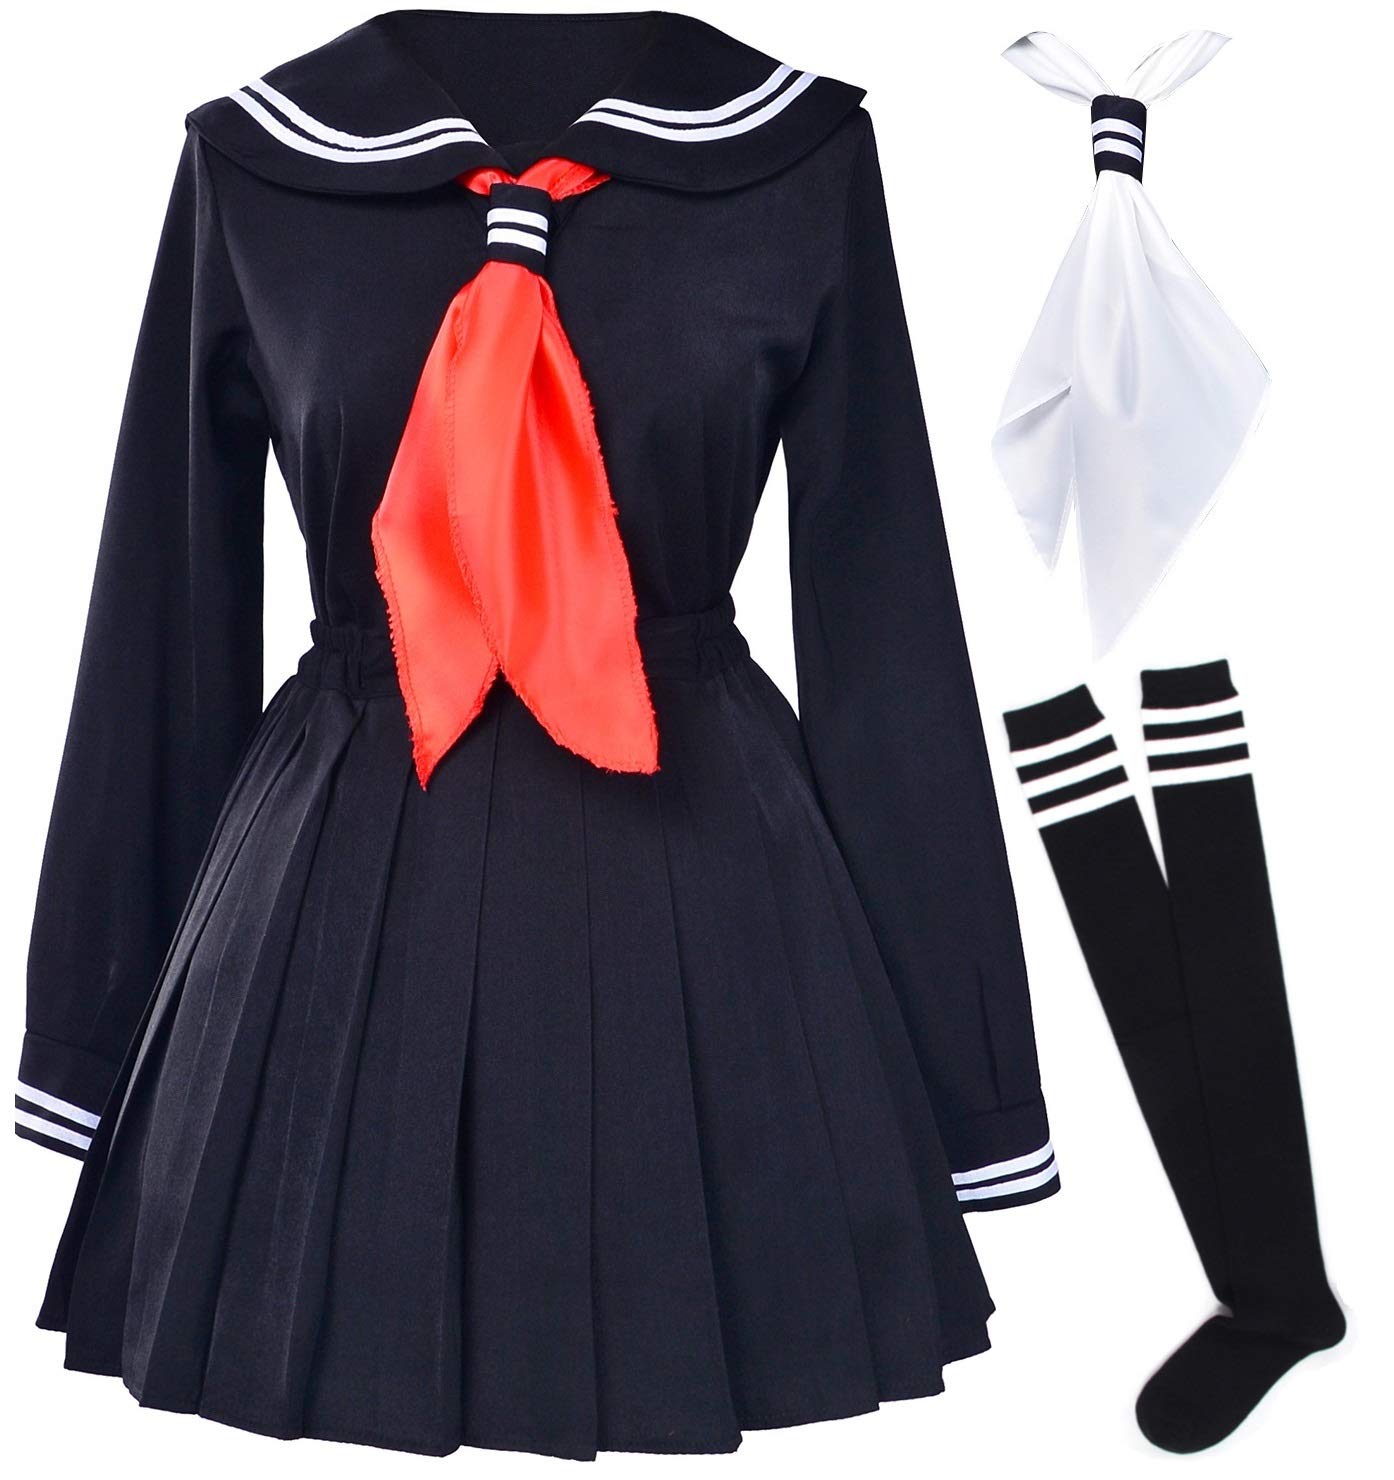 ❤️❤️❤️❤️ | Sailor outfits, Anime character design, Anime outfits